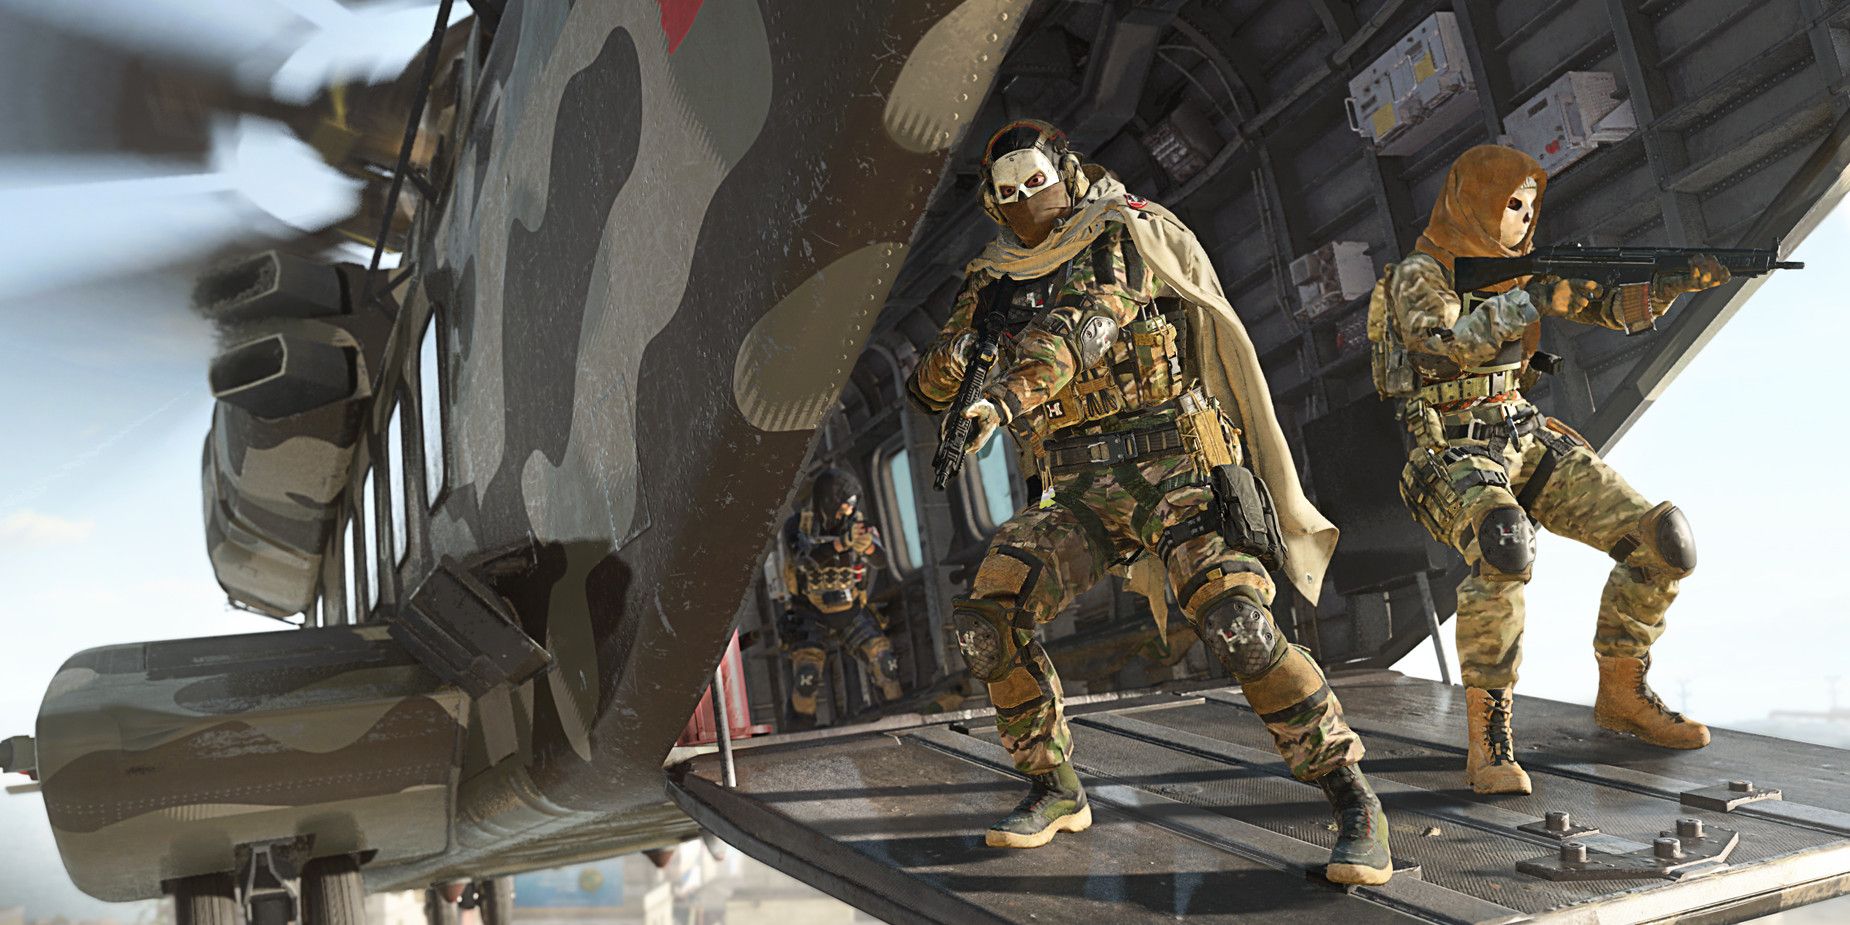 Promotional image for Warzone 2 featuring two characters standing on a helicopter